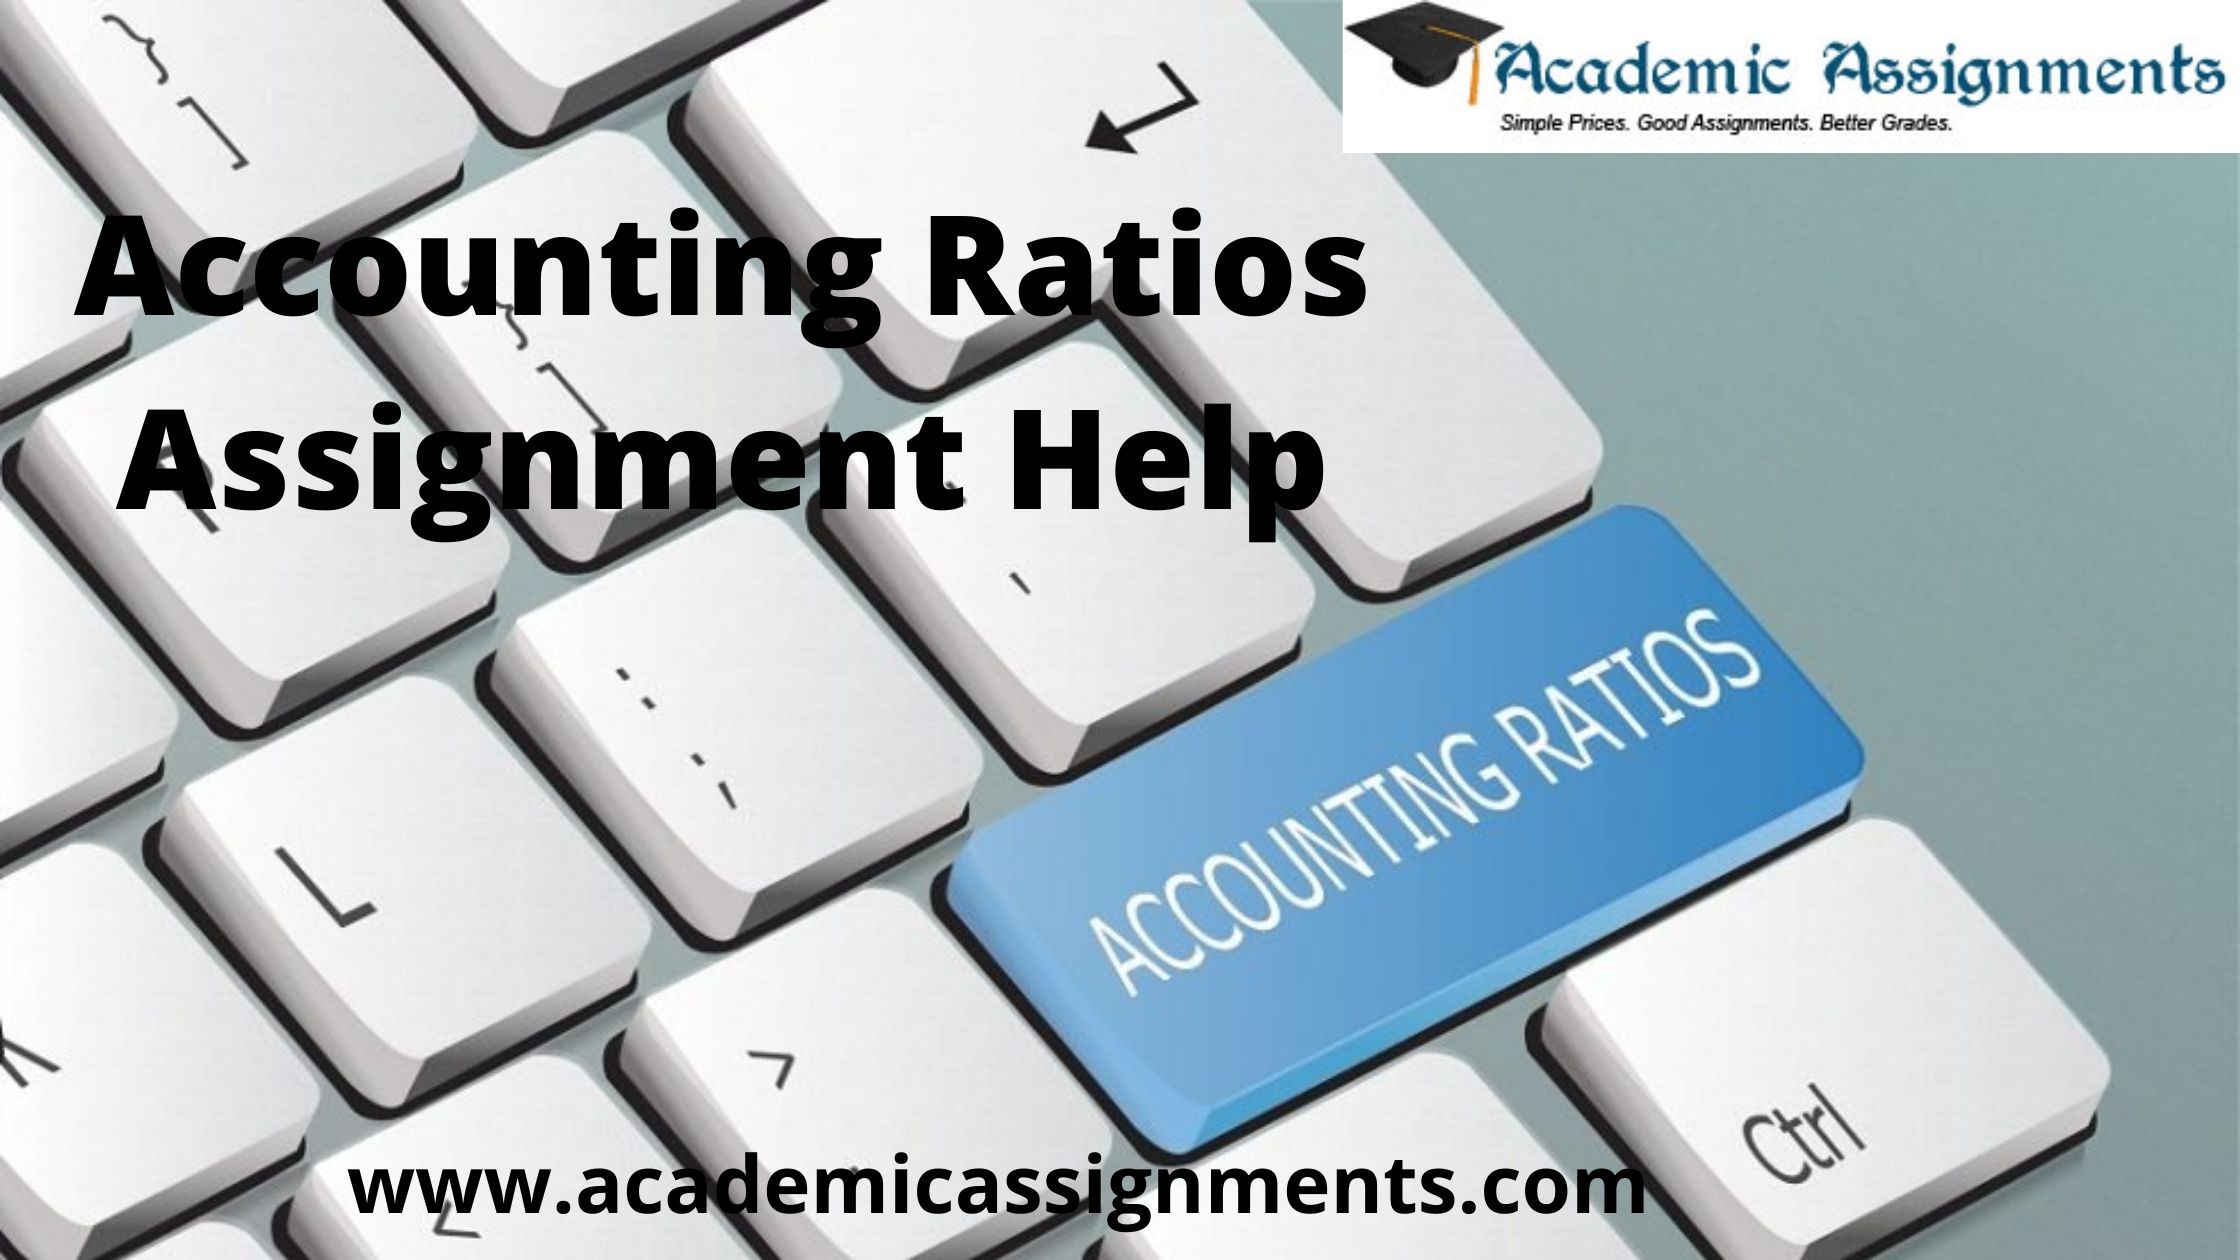 Accounting Ratios Assignment Help